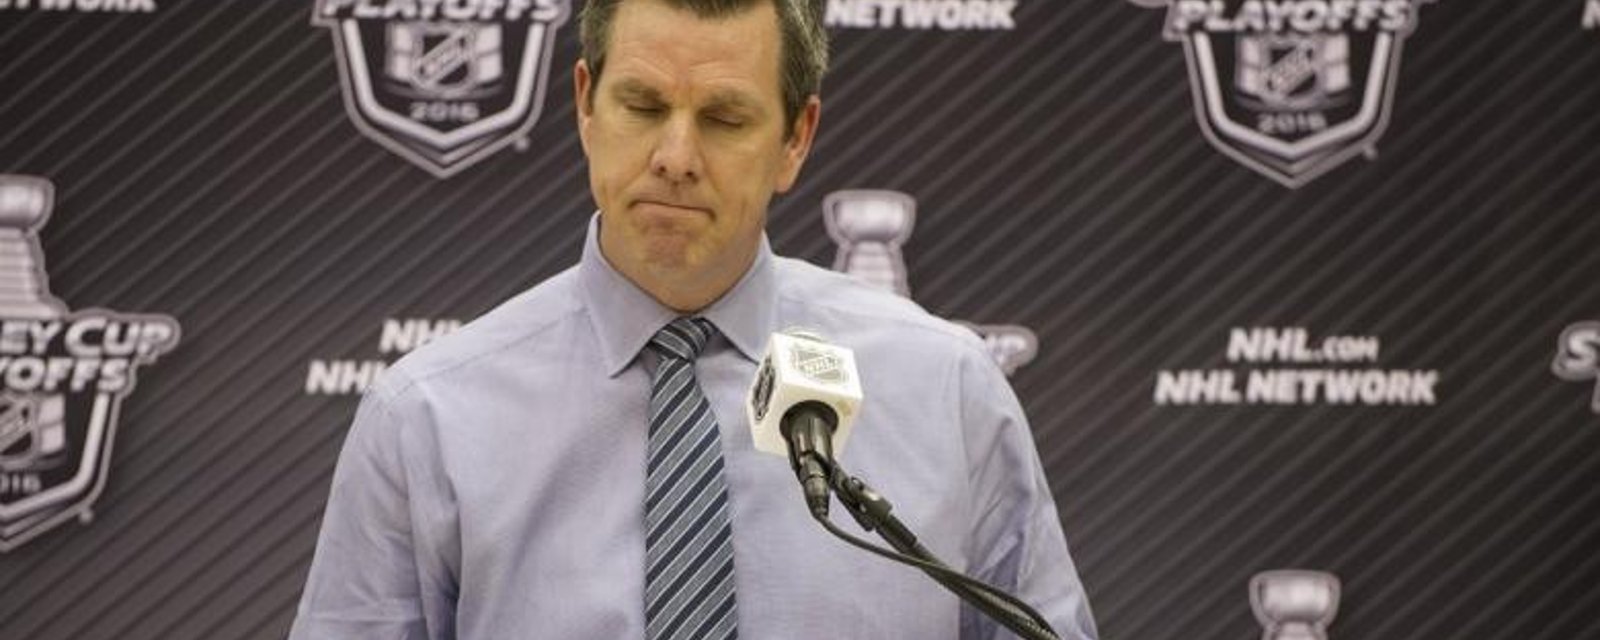 Sullivan responds to accusations of Crosby cheating.